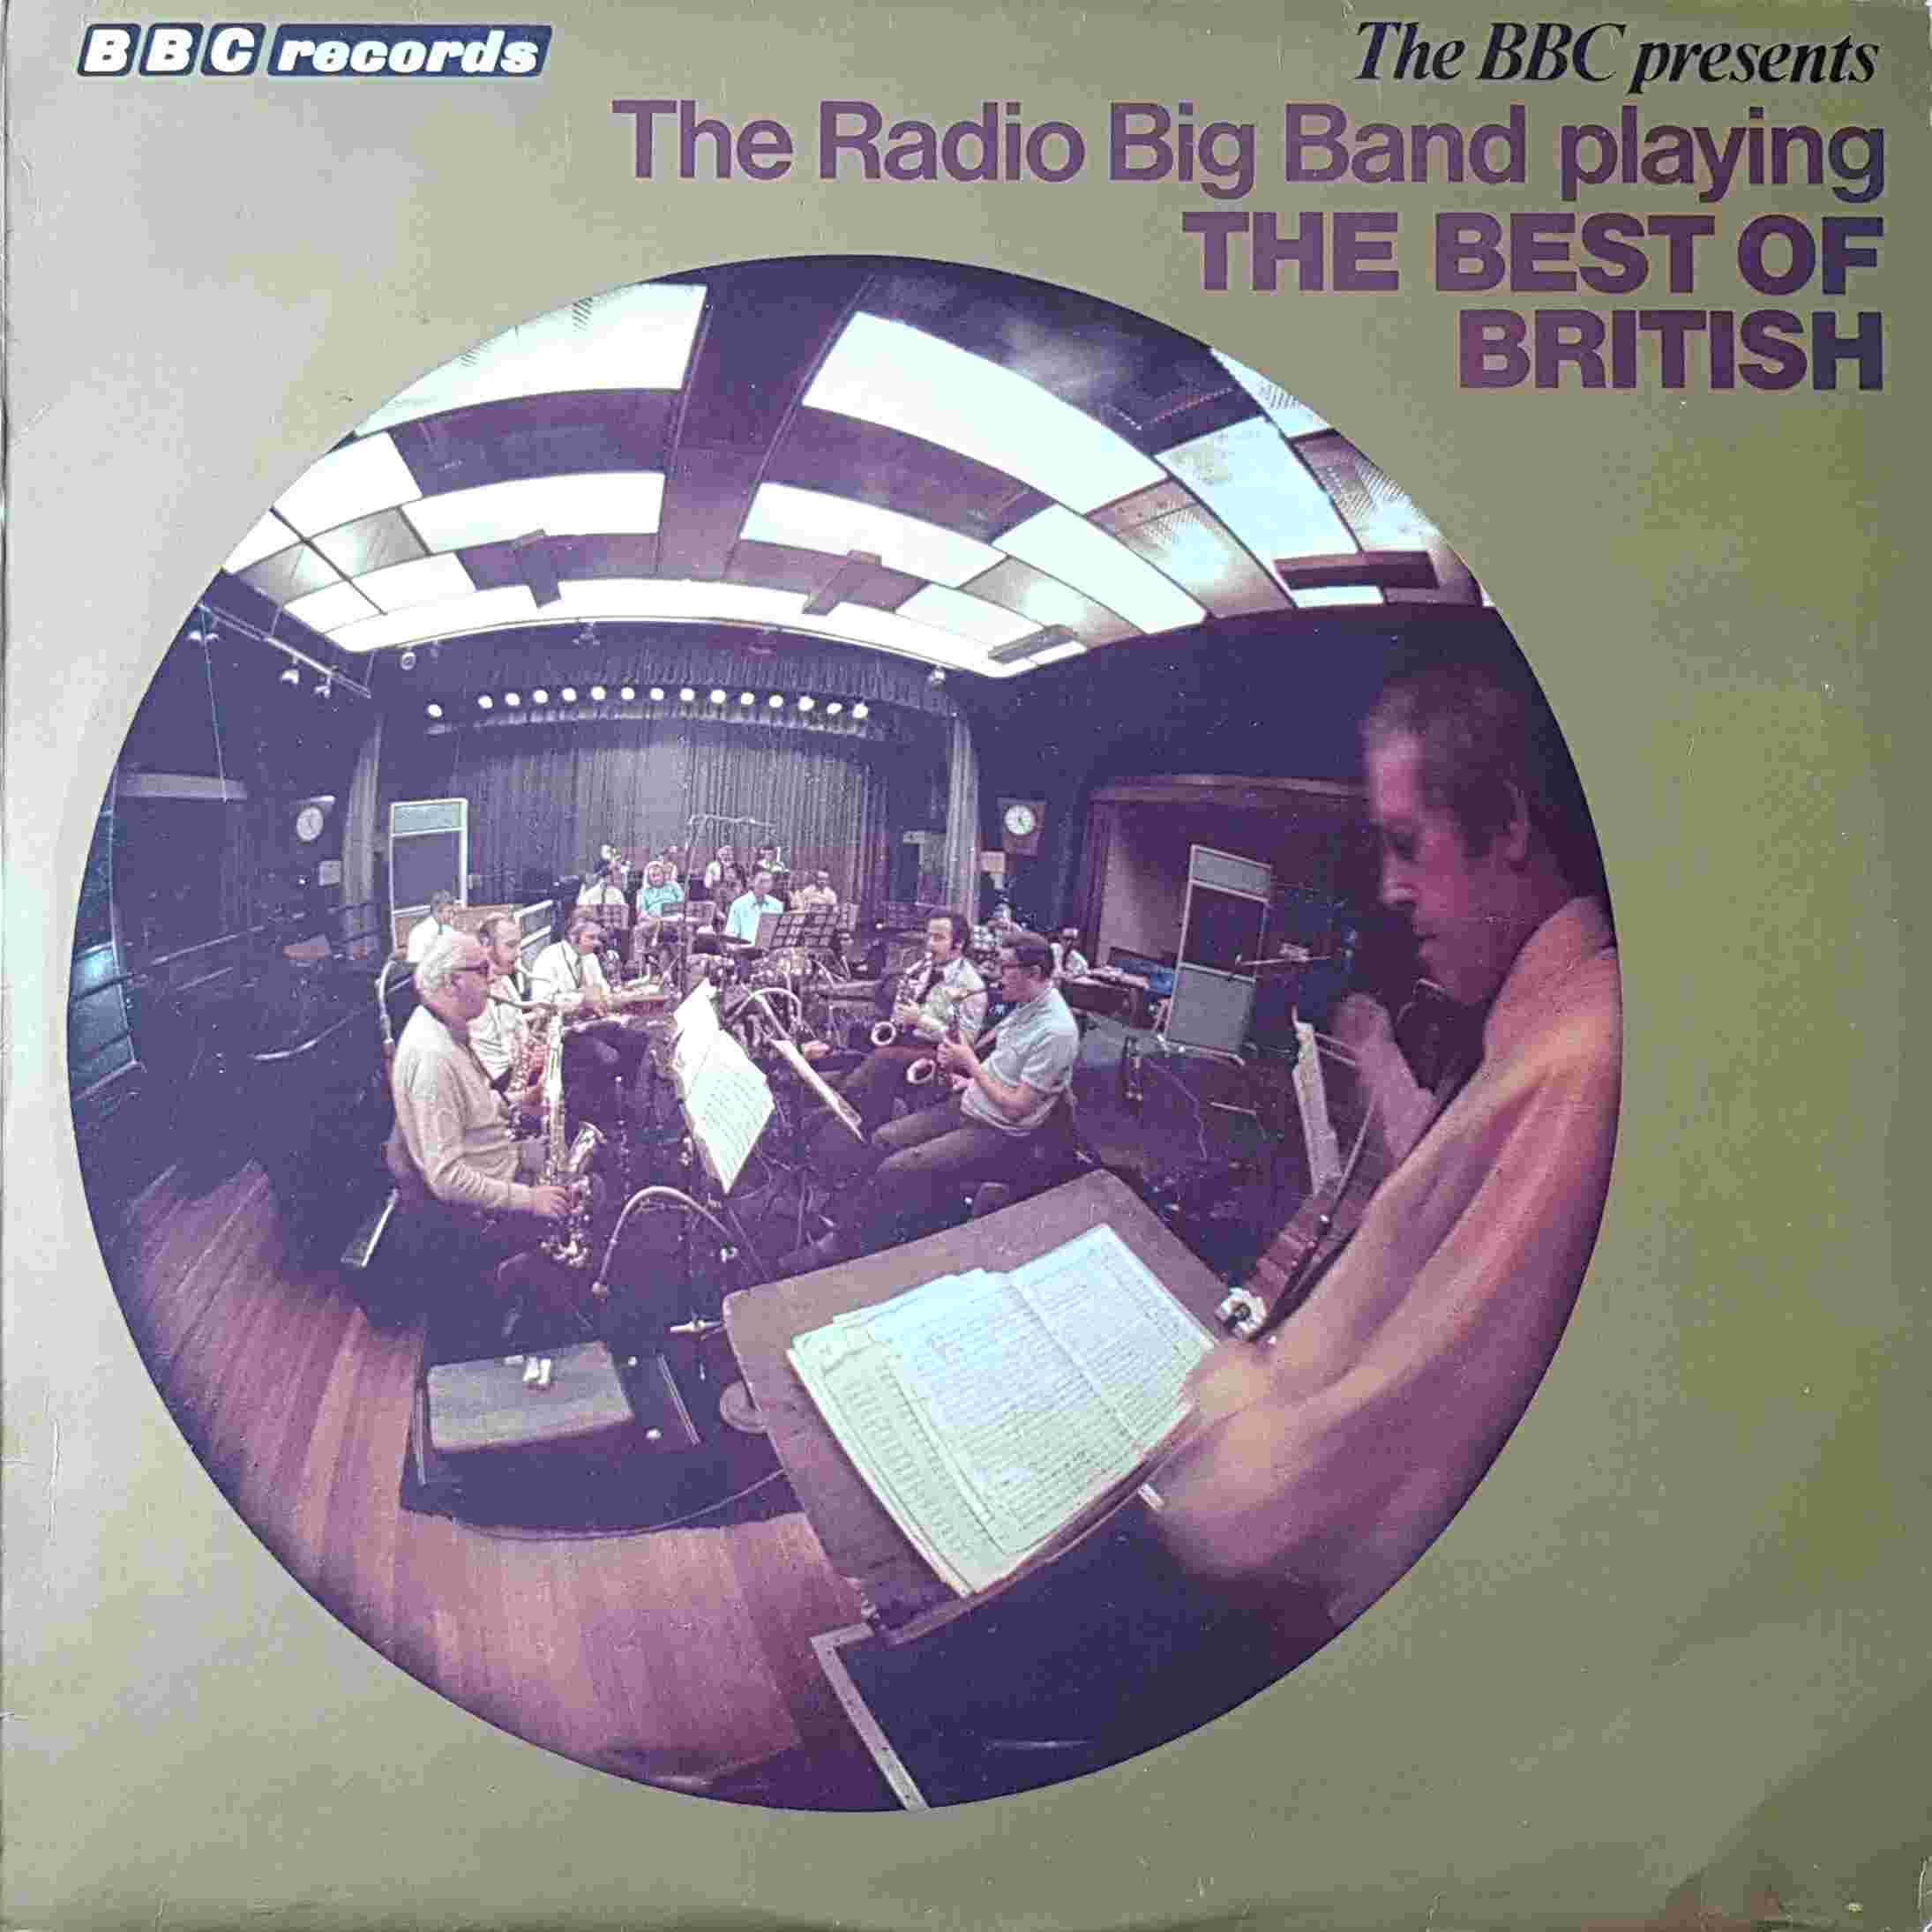 Picture of REC 131 Radio big band plating: Best of British by artist Various from the BBC albums - Records and Tapes library